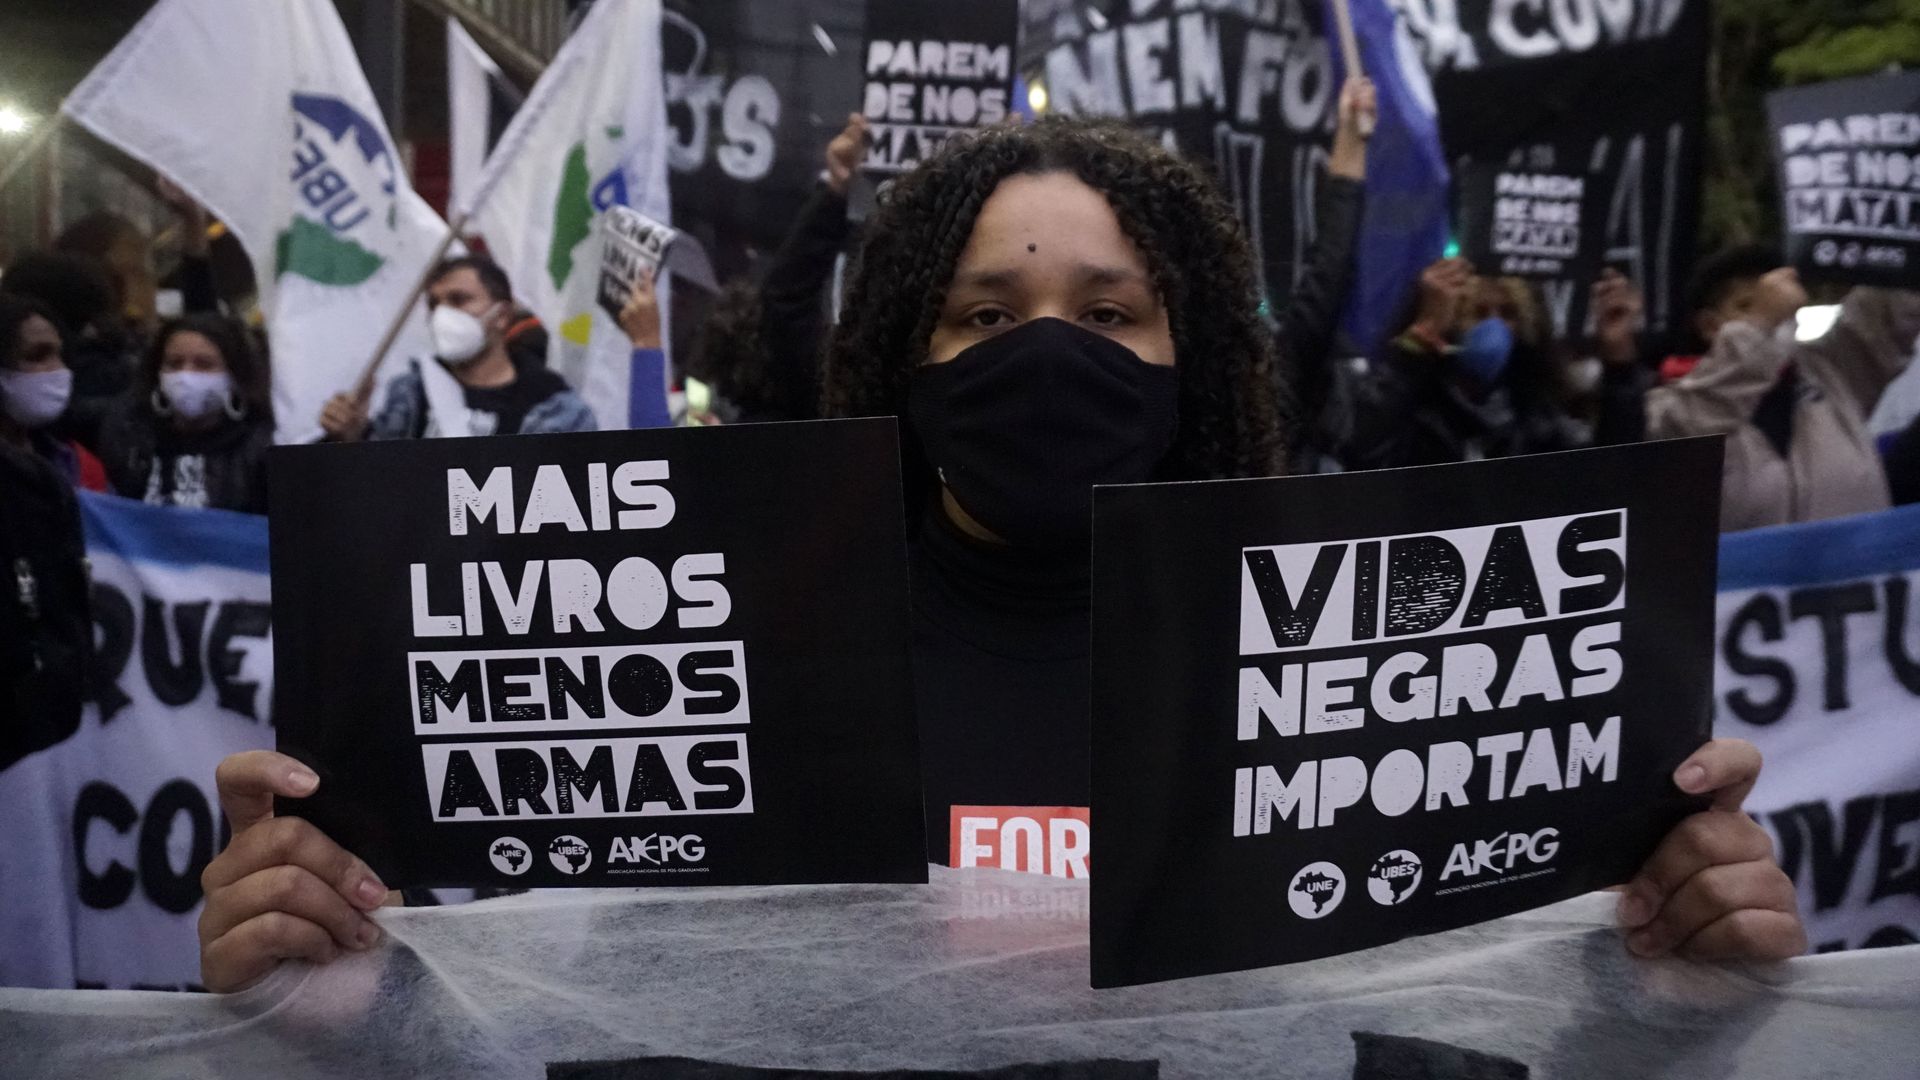 People take part in a protest during the National Day Against Racism conmemorating the 133rd anniversary of the Slavery abolition in Brazil at Paulista Avenue in Sao Paulo, Brazil